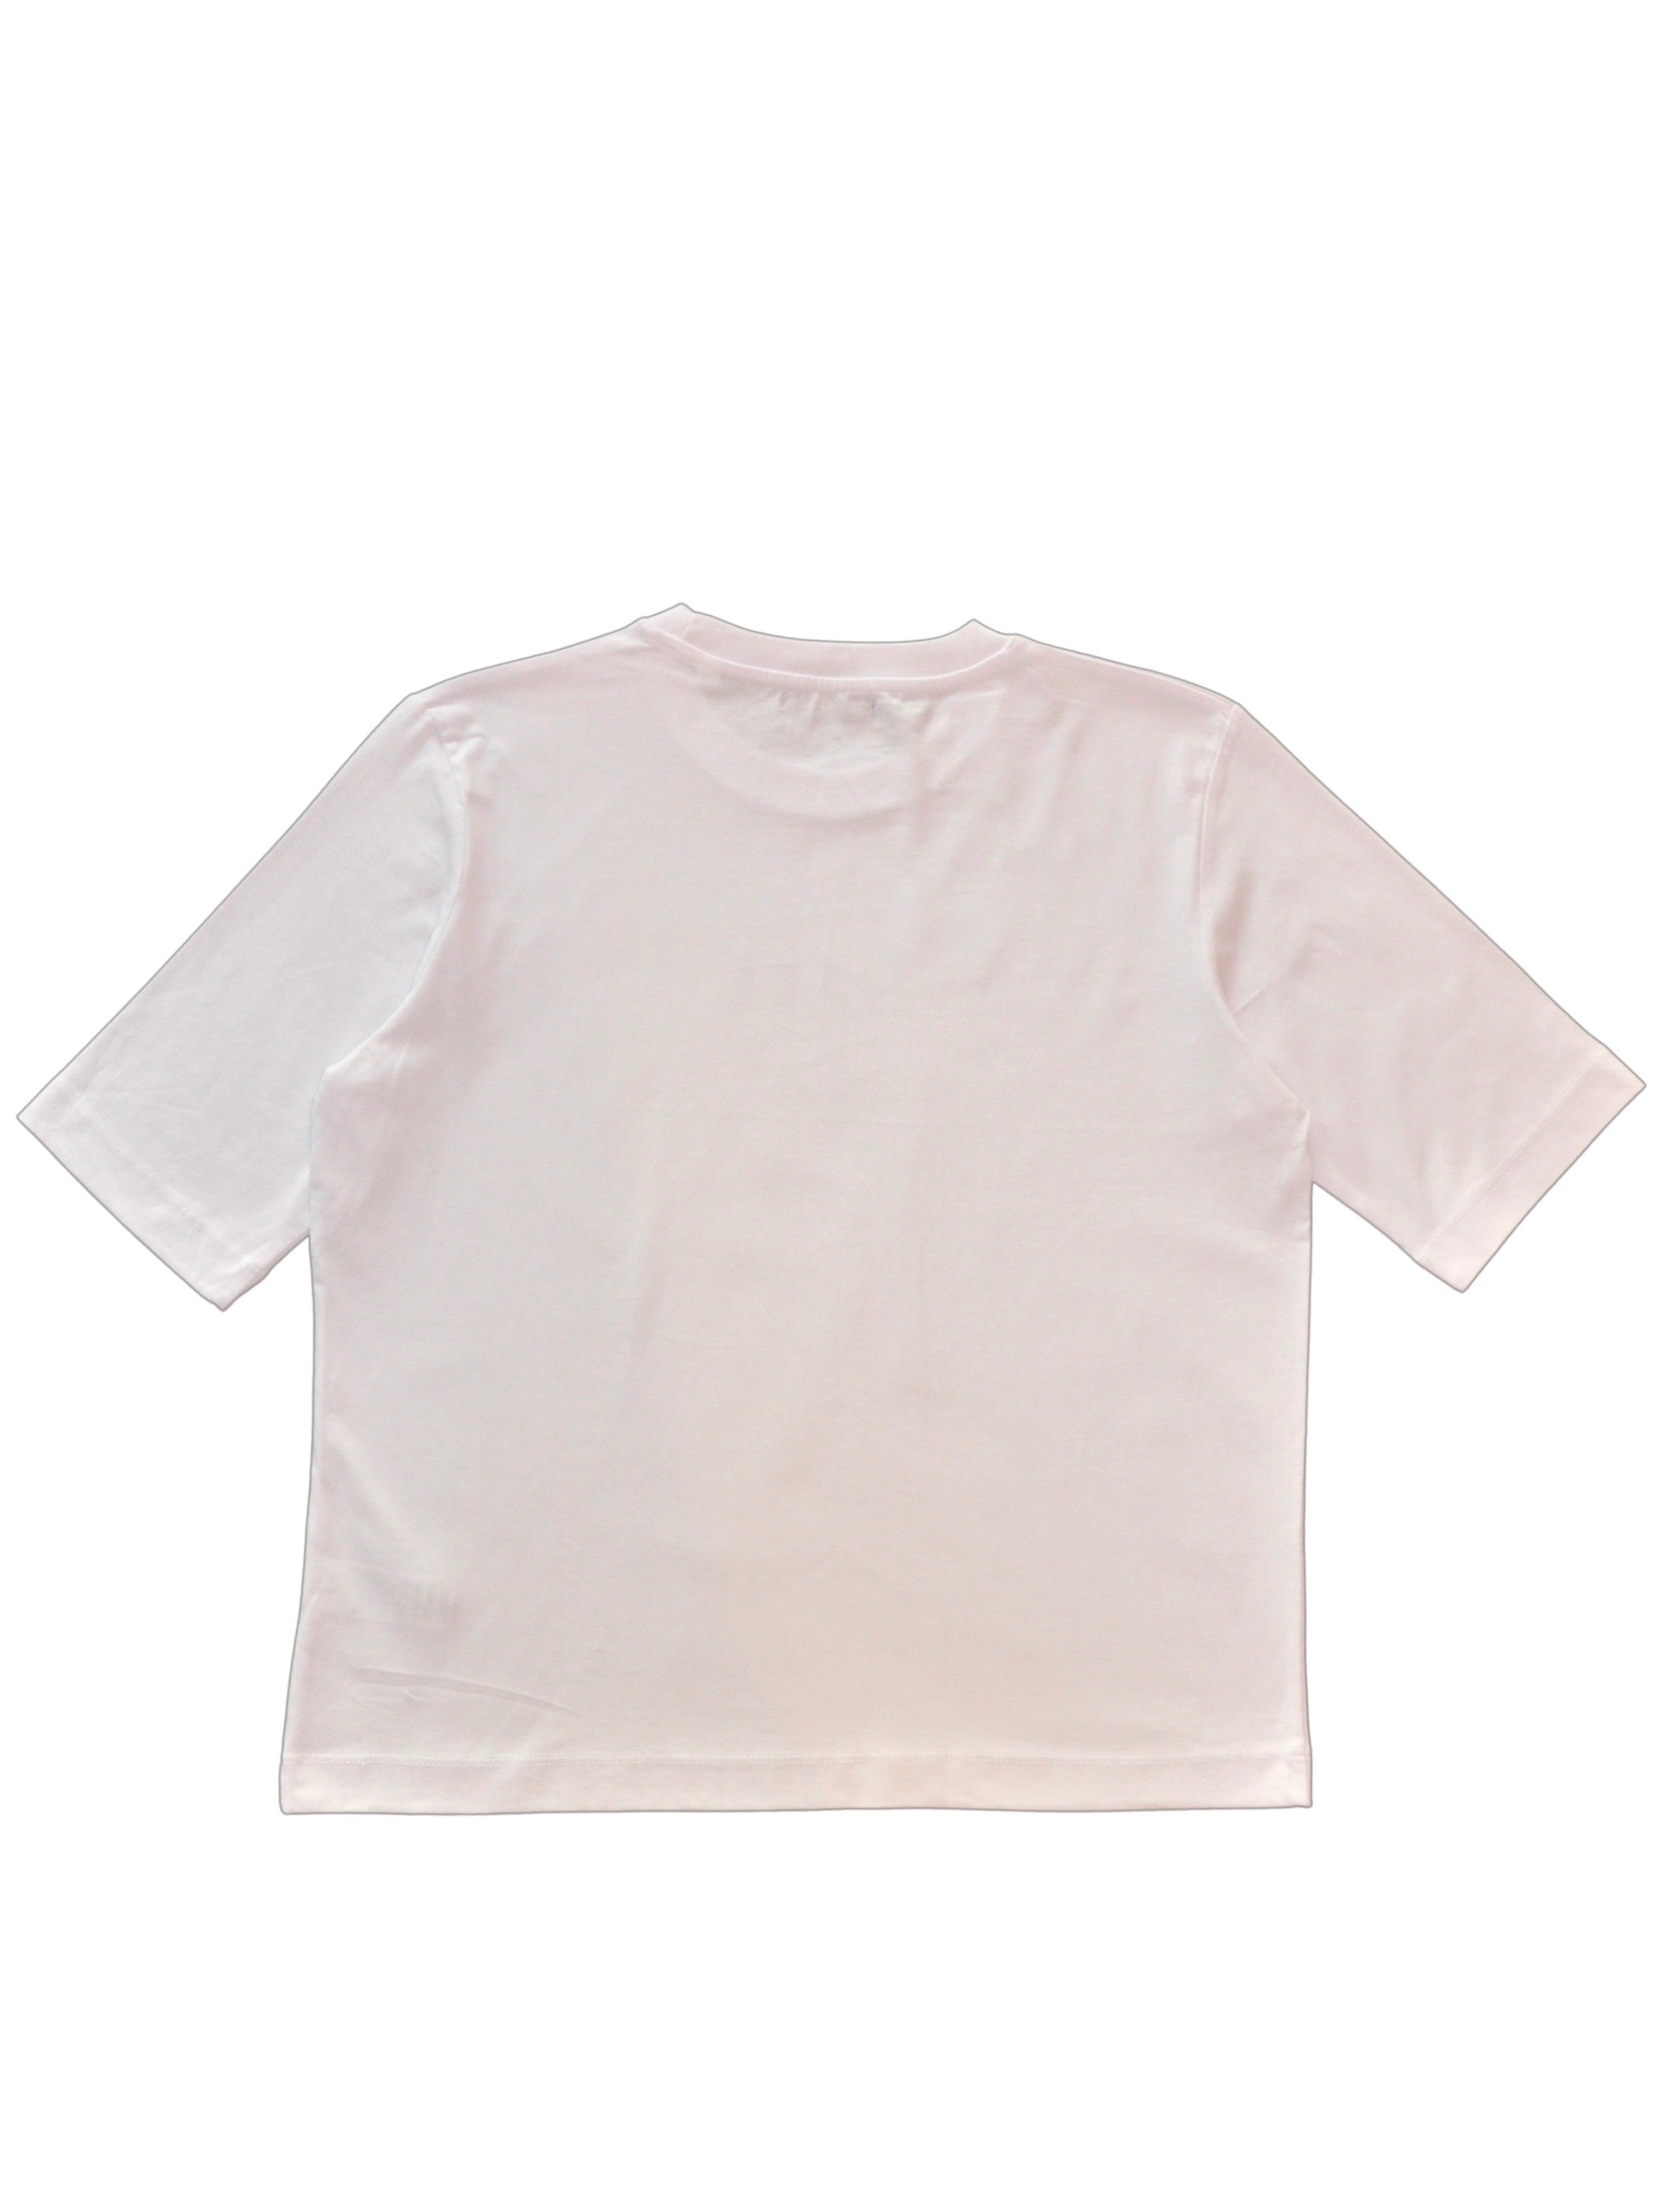 BY11 Organic Cotton Easy Fit T-shirt - White